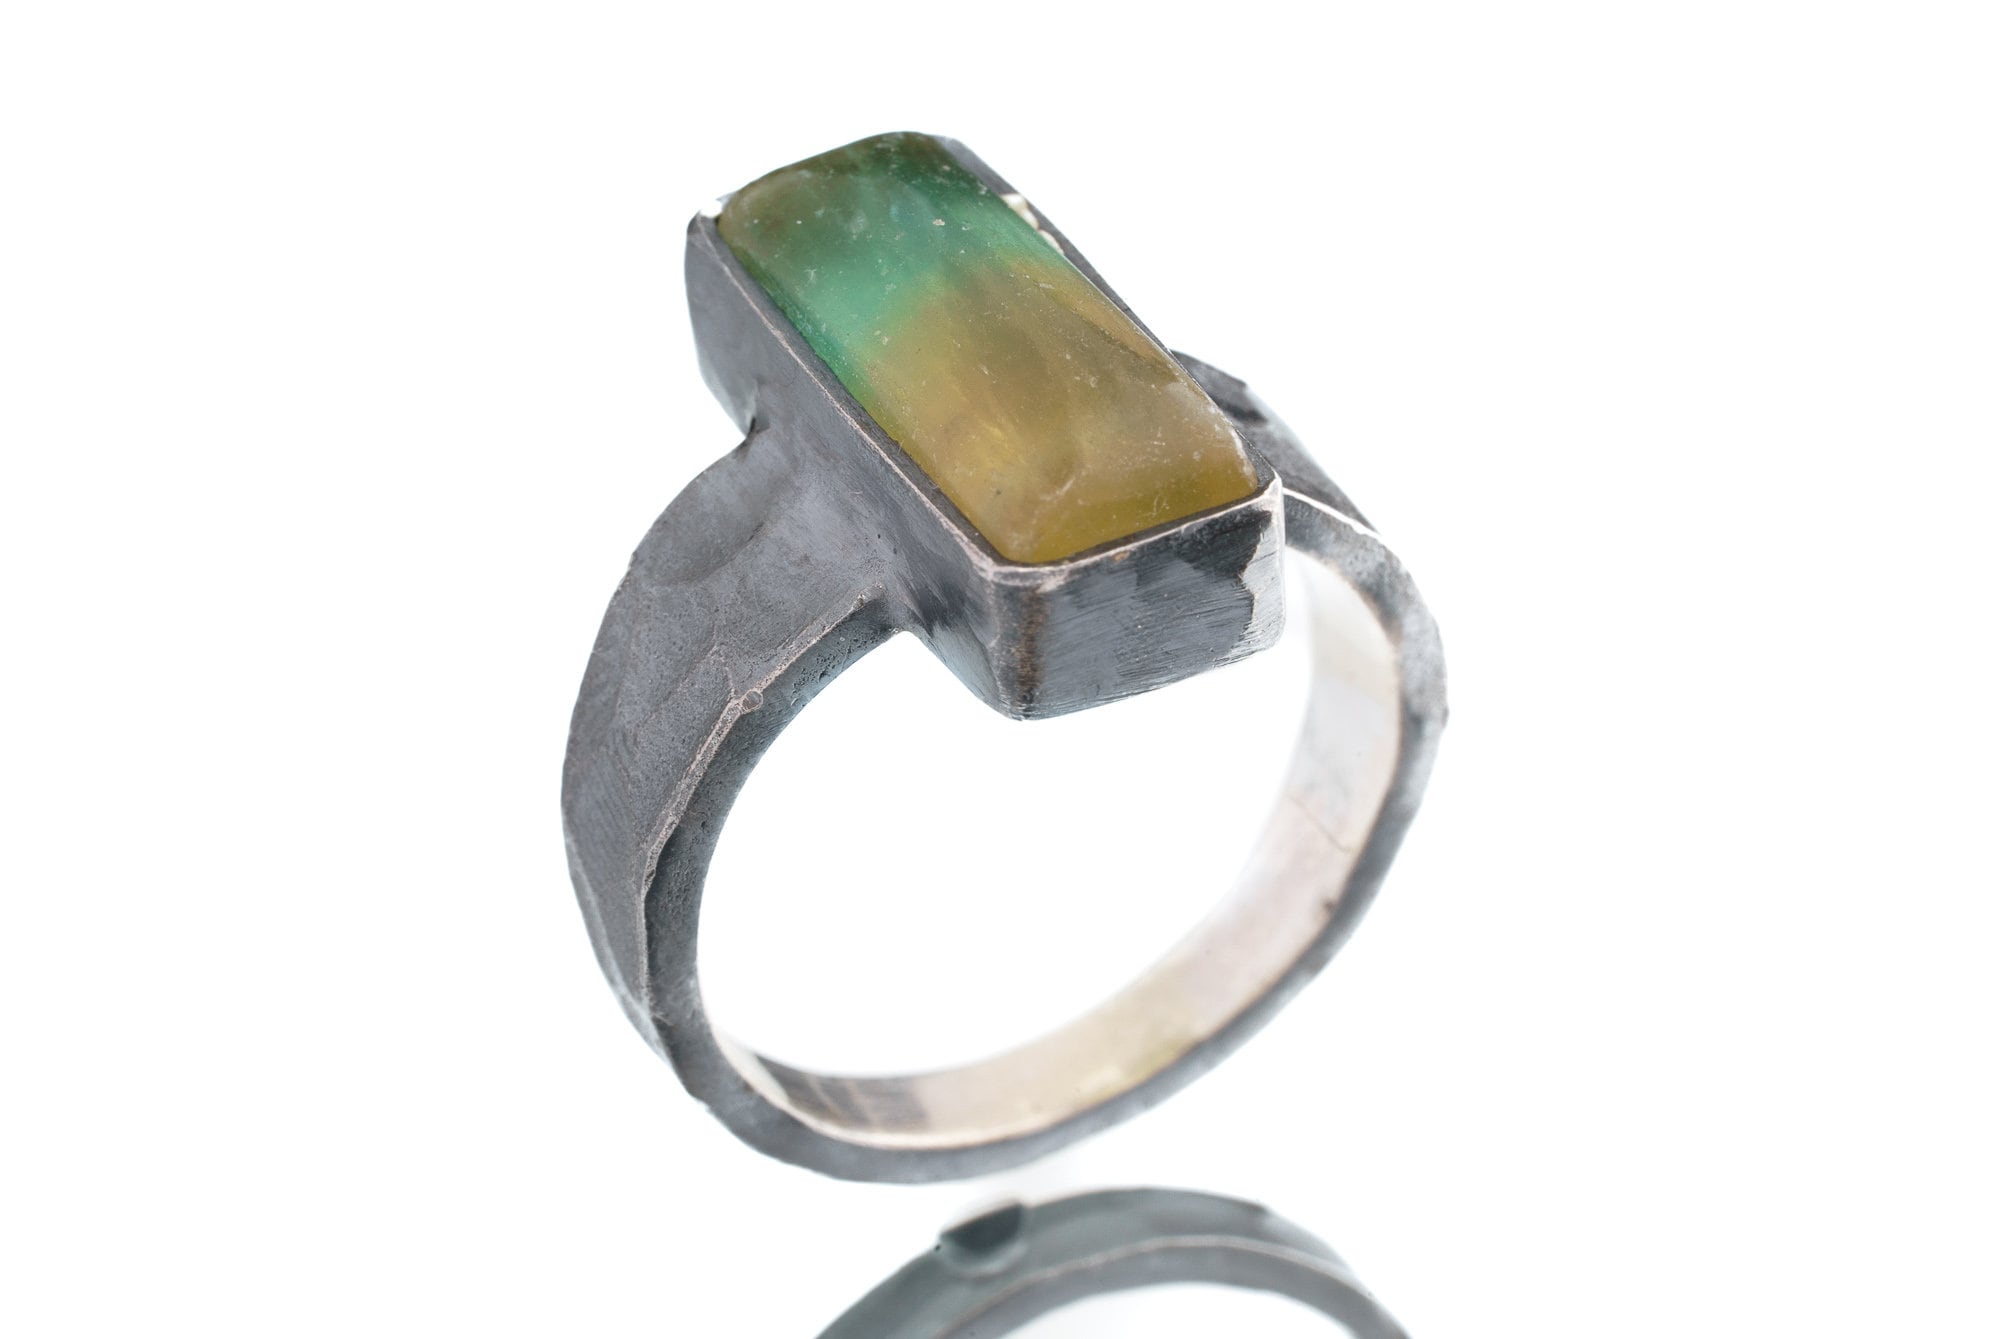 Bicolour Fluorite Cabochon - Men's / Unisex Large Crystal Ring - Size 8 1/2 US - 925 Sterling Silver - Hammer Textured & Oxidised